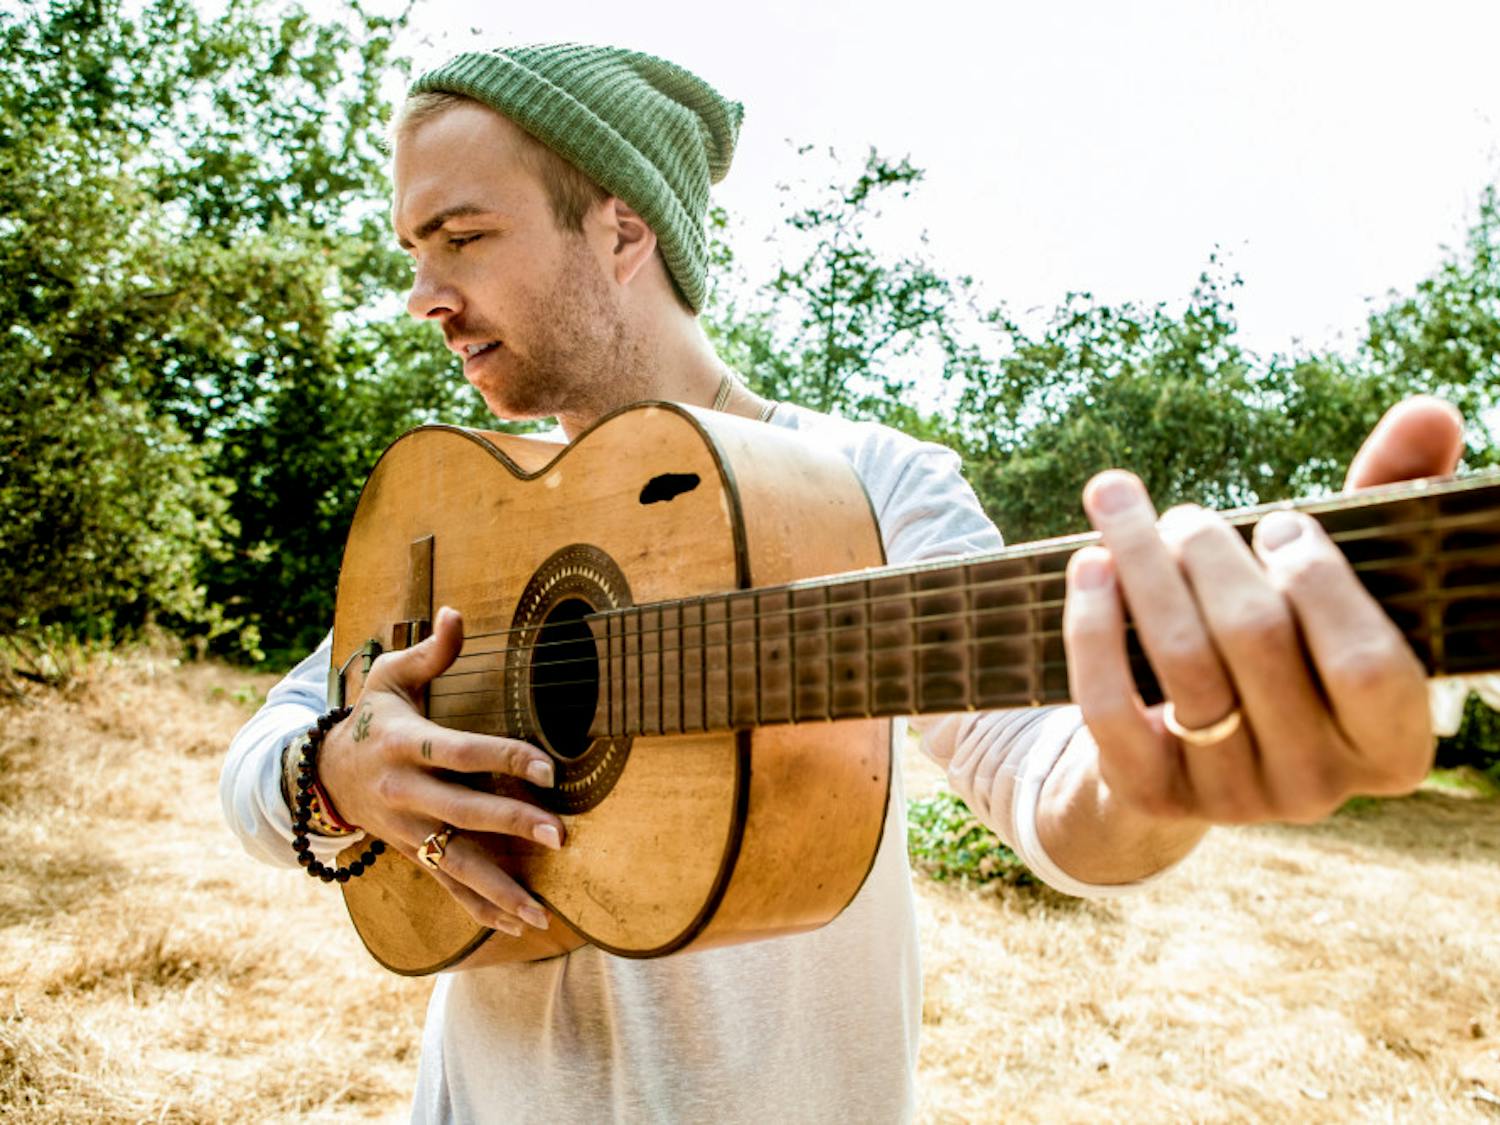 Los Angeles folk and reggae artist Trevor Hall is performing Friday at High Dive, 210 SW Second Ave. Doors open at 8 p.m., and the show begins at 10 p.m.